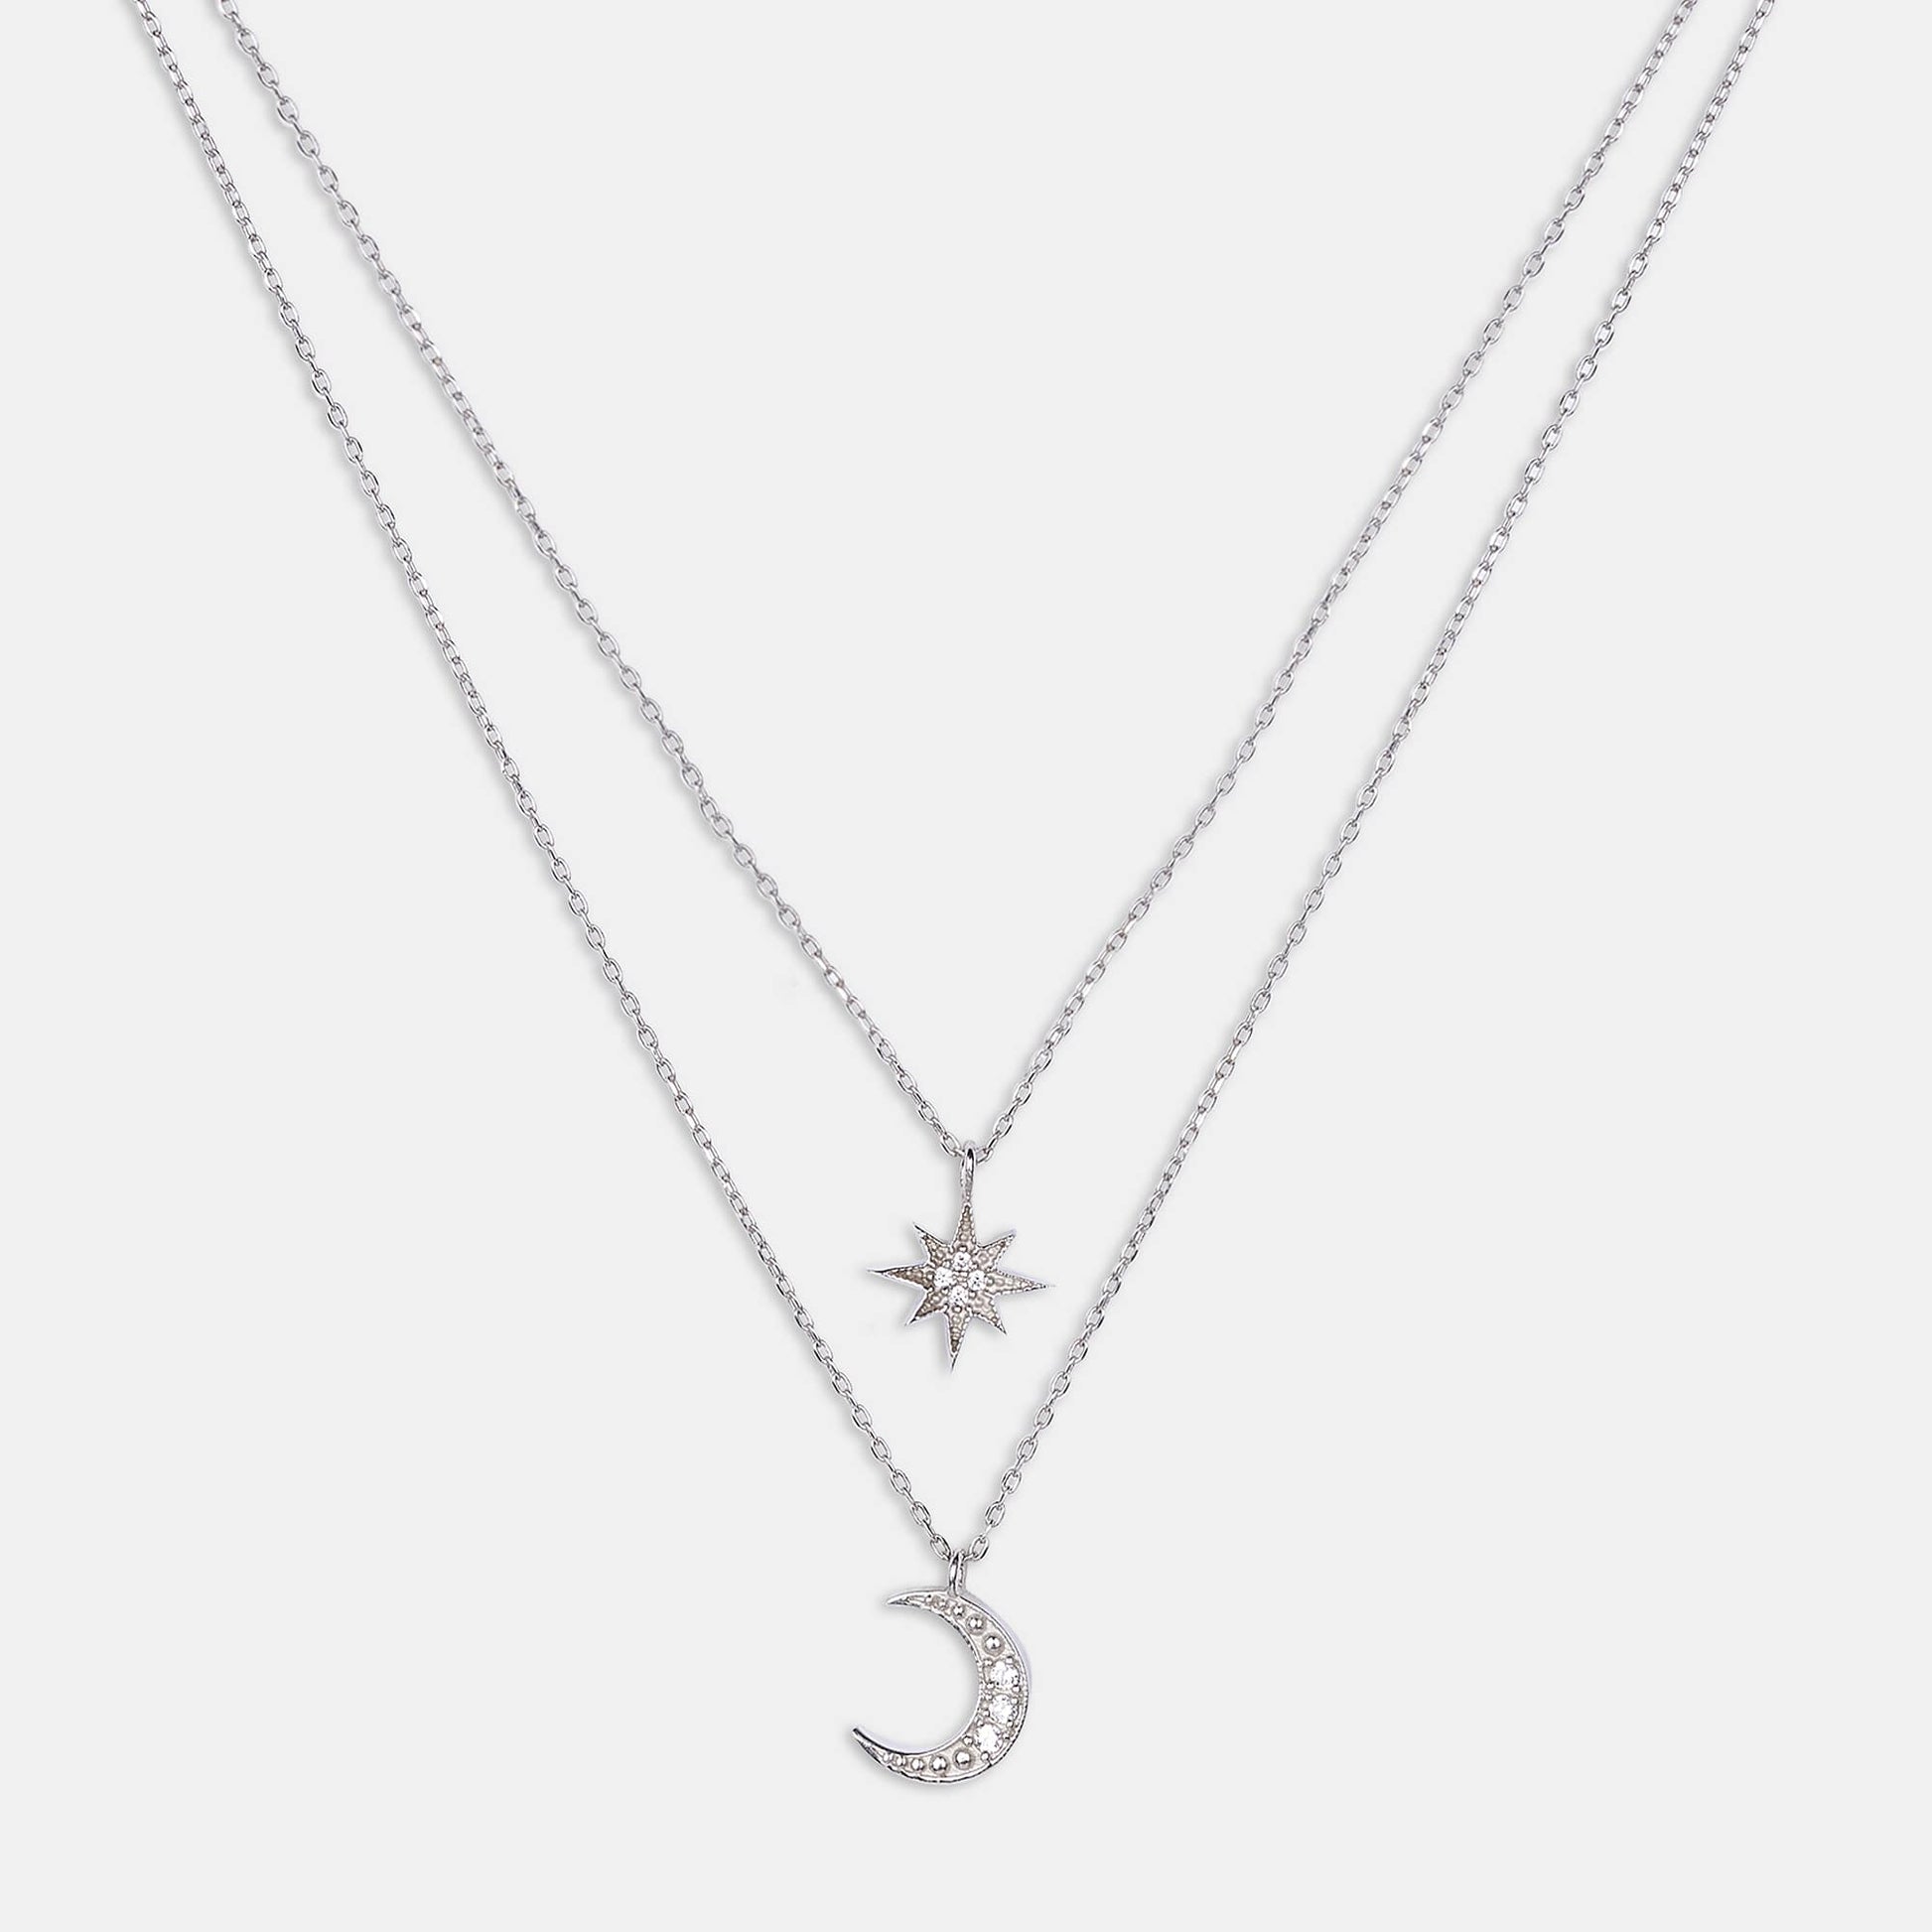 Discover our exquisite collection of sterling silver necklaces featuring a delicate moon pendant and a charming star pendant. Perfect for adding a touch of celestial elegance to any outfit.